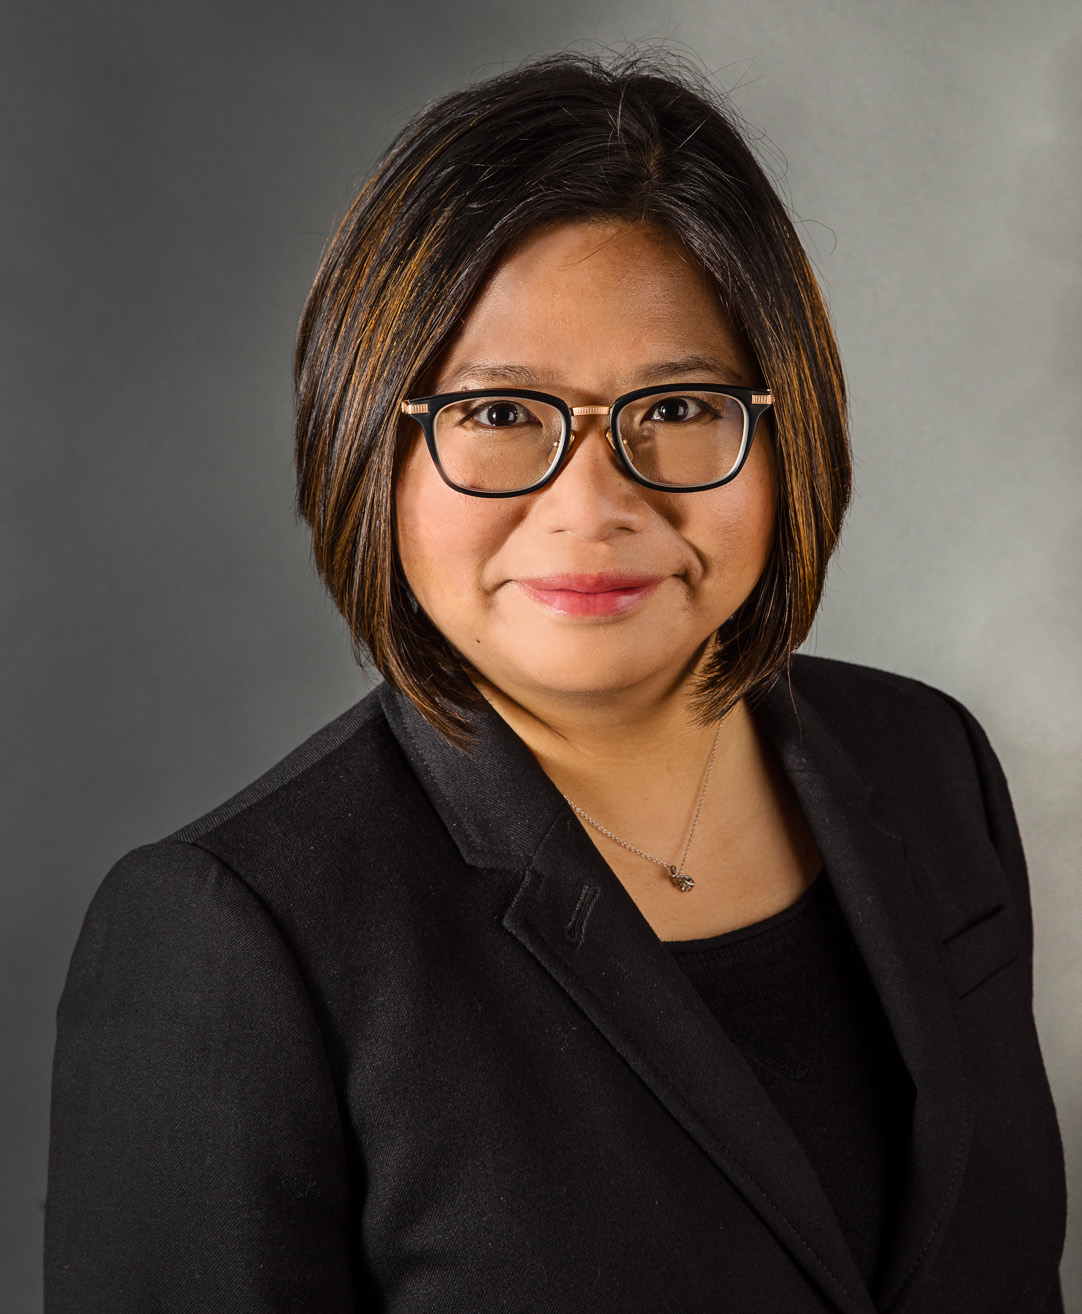 The Sladkus Law Group Welcomes Amy Hsiao to their Team